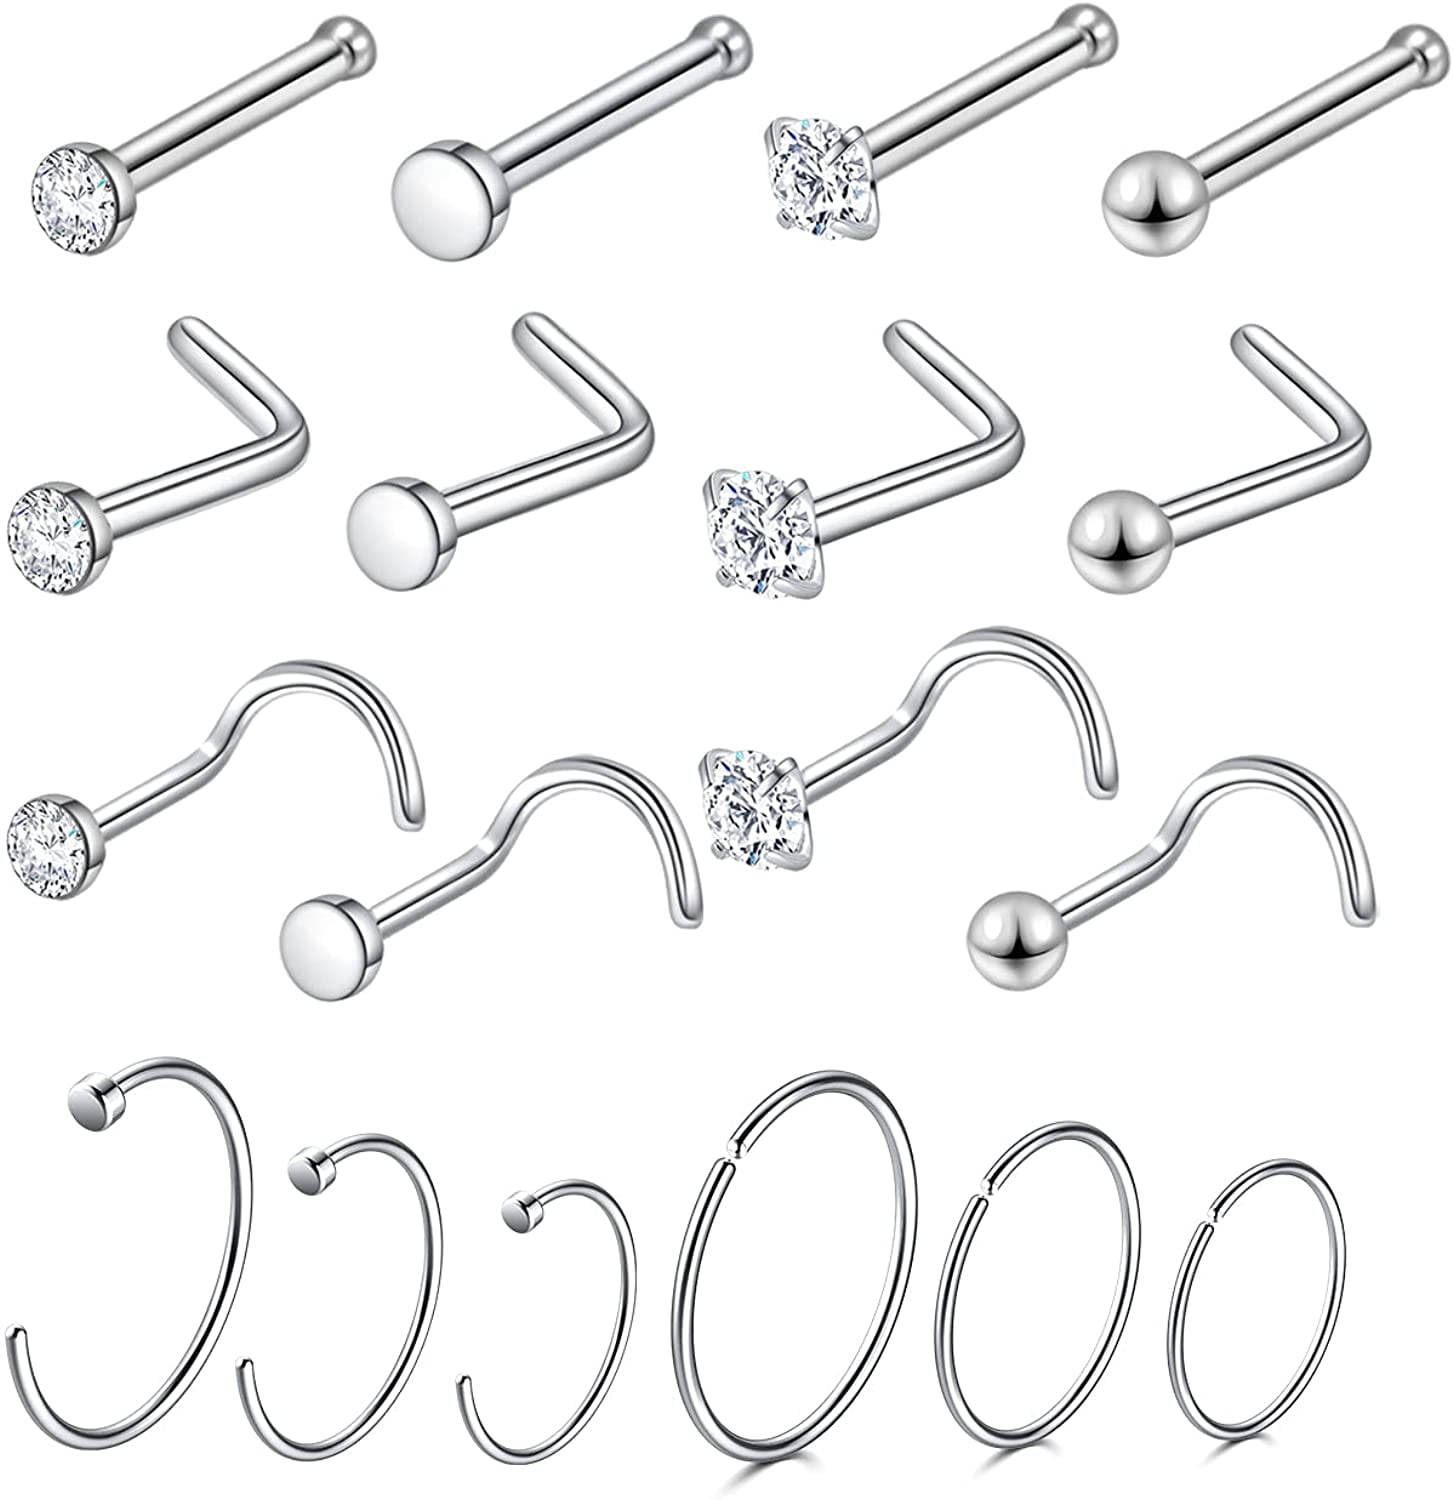 A+s 4Pcs 20G 10mm WomenS Cute Stainless Steel Nose Studs Rings Unisex Body Jewelry Piercing Nose Hoop Ring Fashion Piercing Jewelry